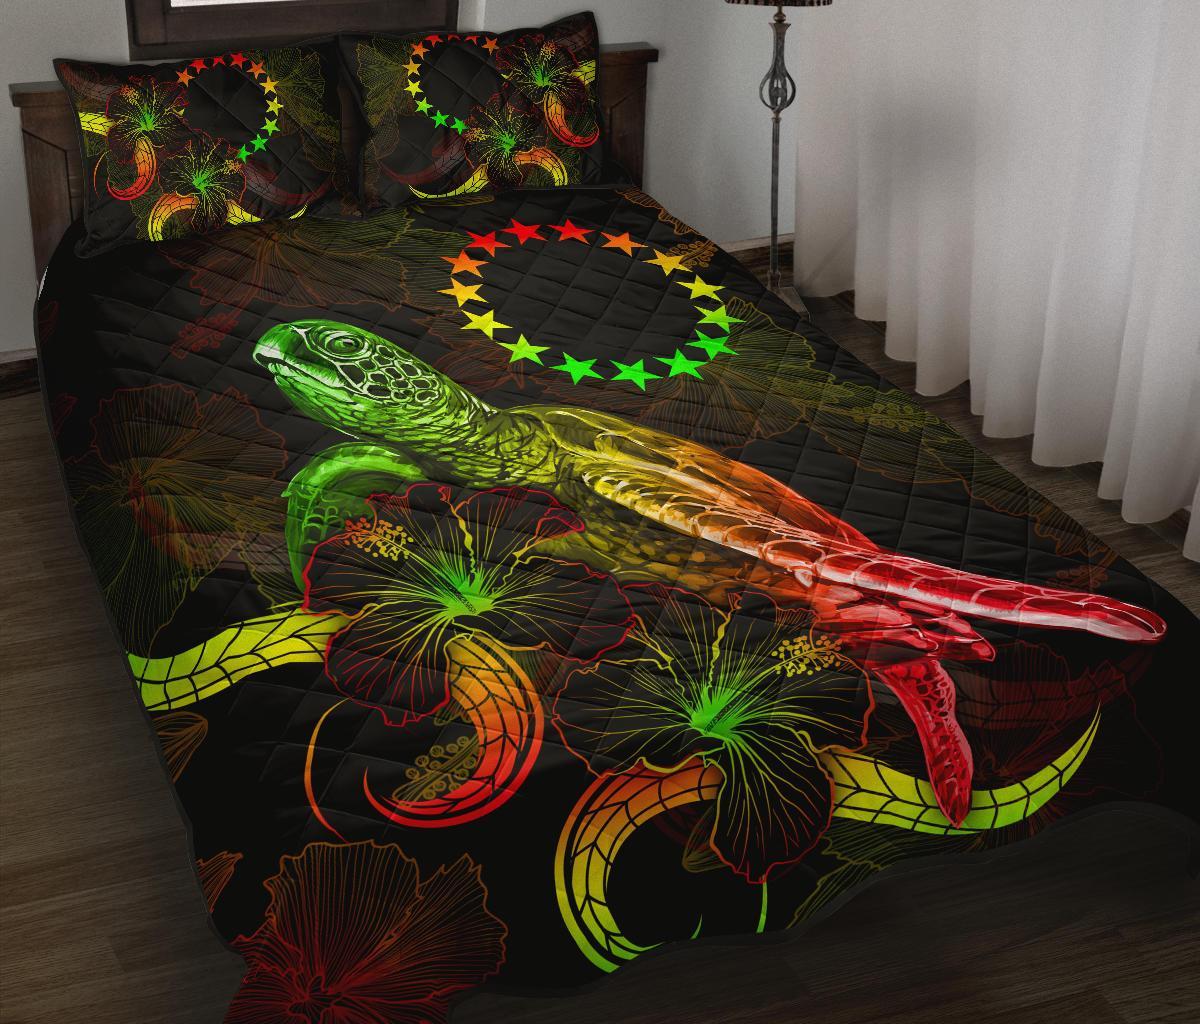 Cook Islands of Micronesia Polynesian Quilt Bed Set - Turtle With Blooming Hibiscus Reggae Art - Polynesian Pride